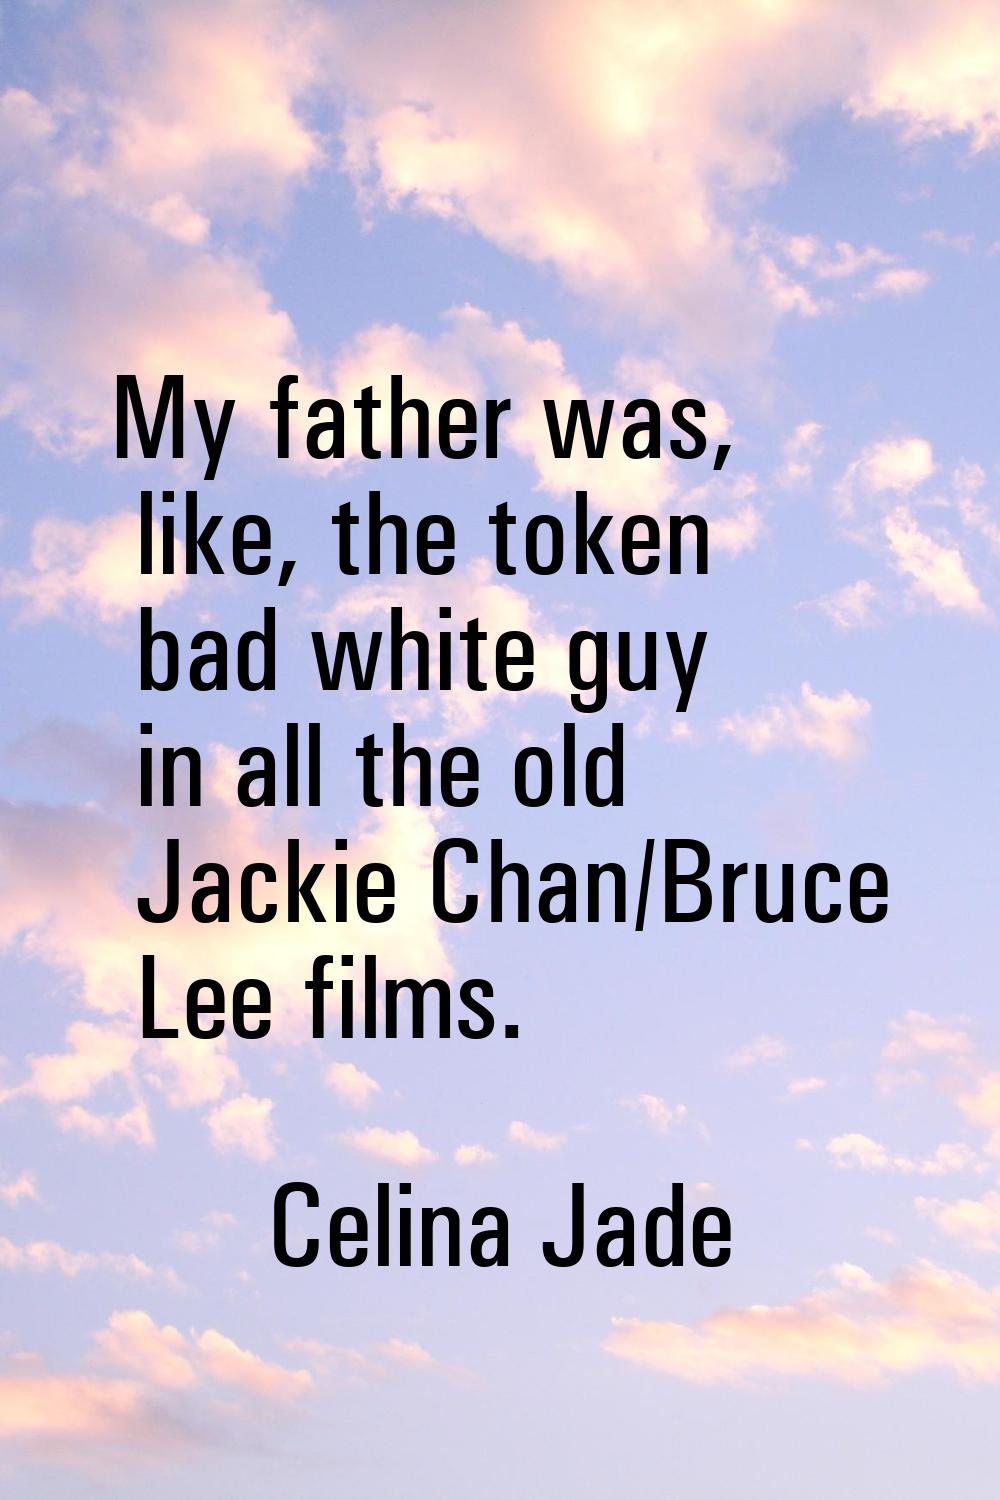 My father was, like, the token bad white guy in all the old Jackie Chan/Bruce Lee films.